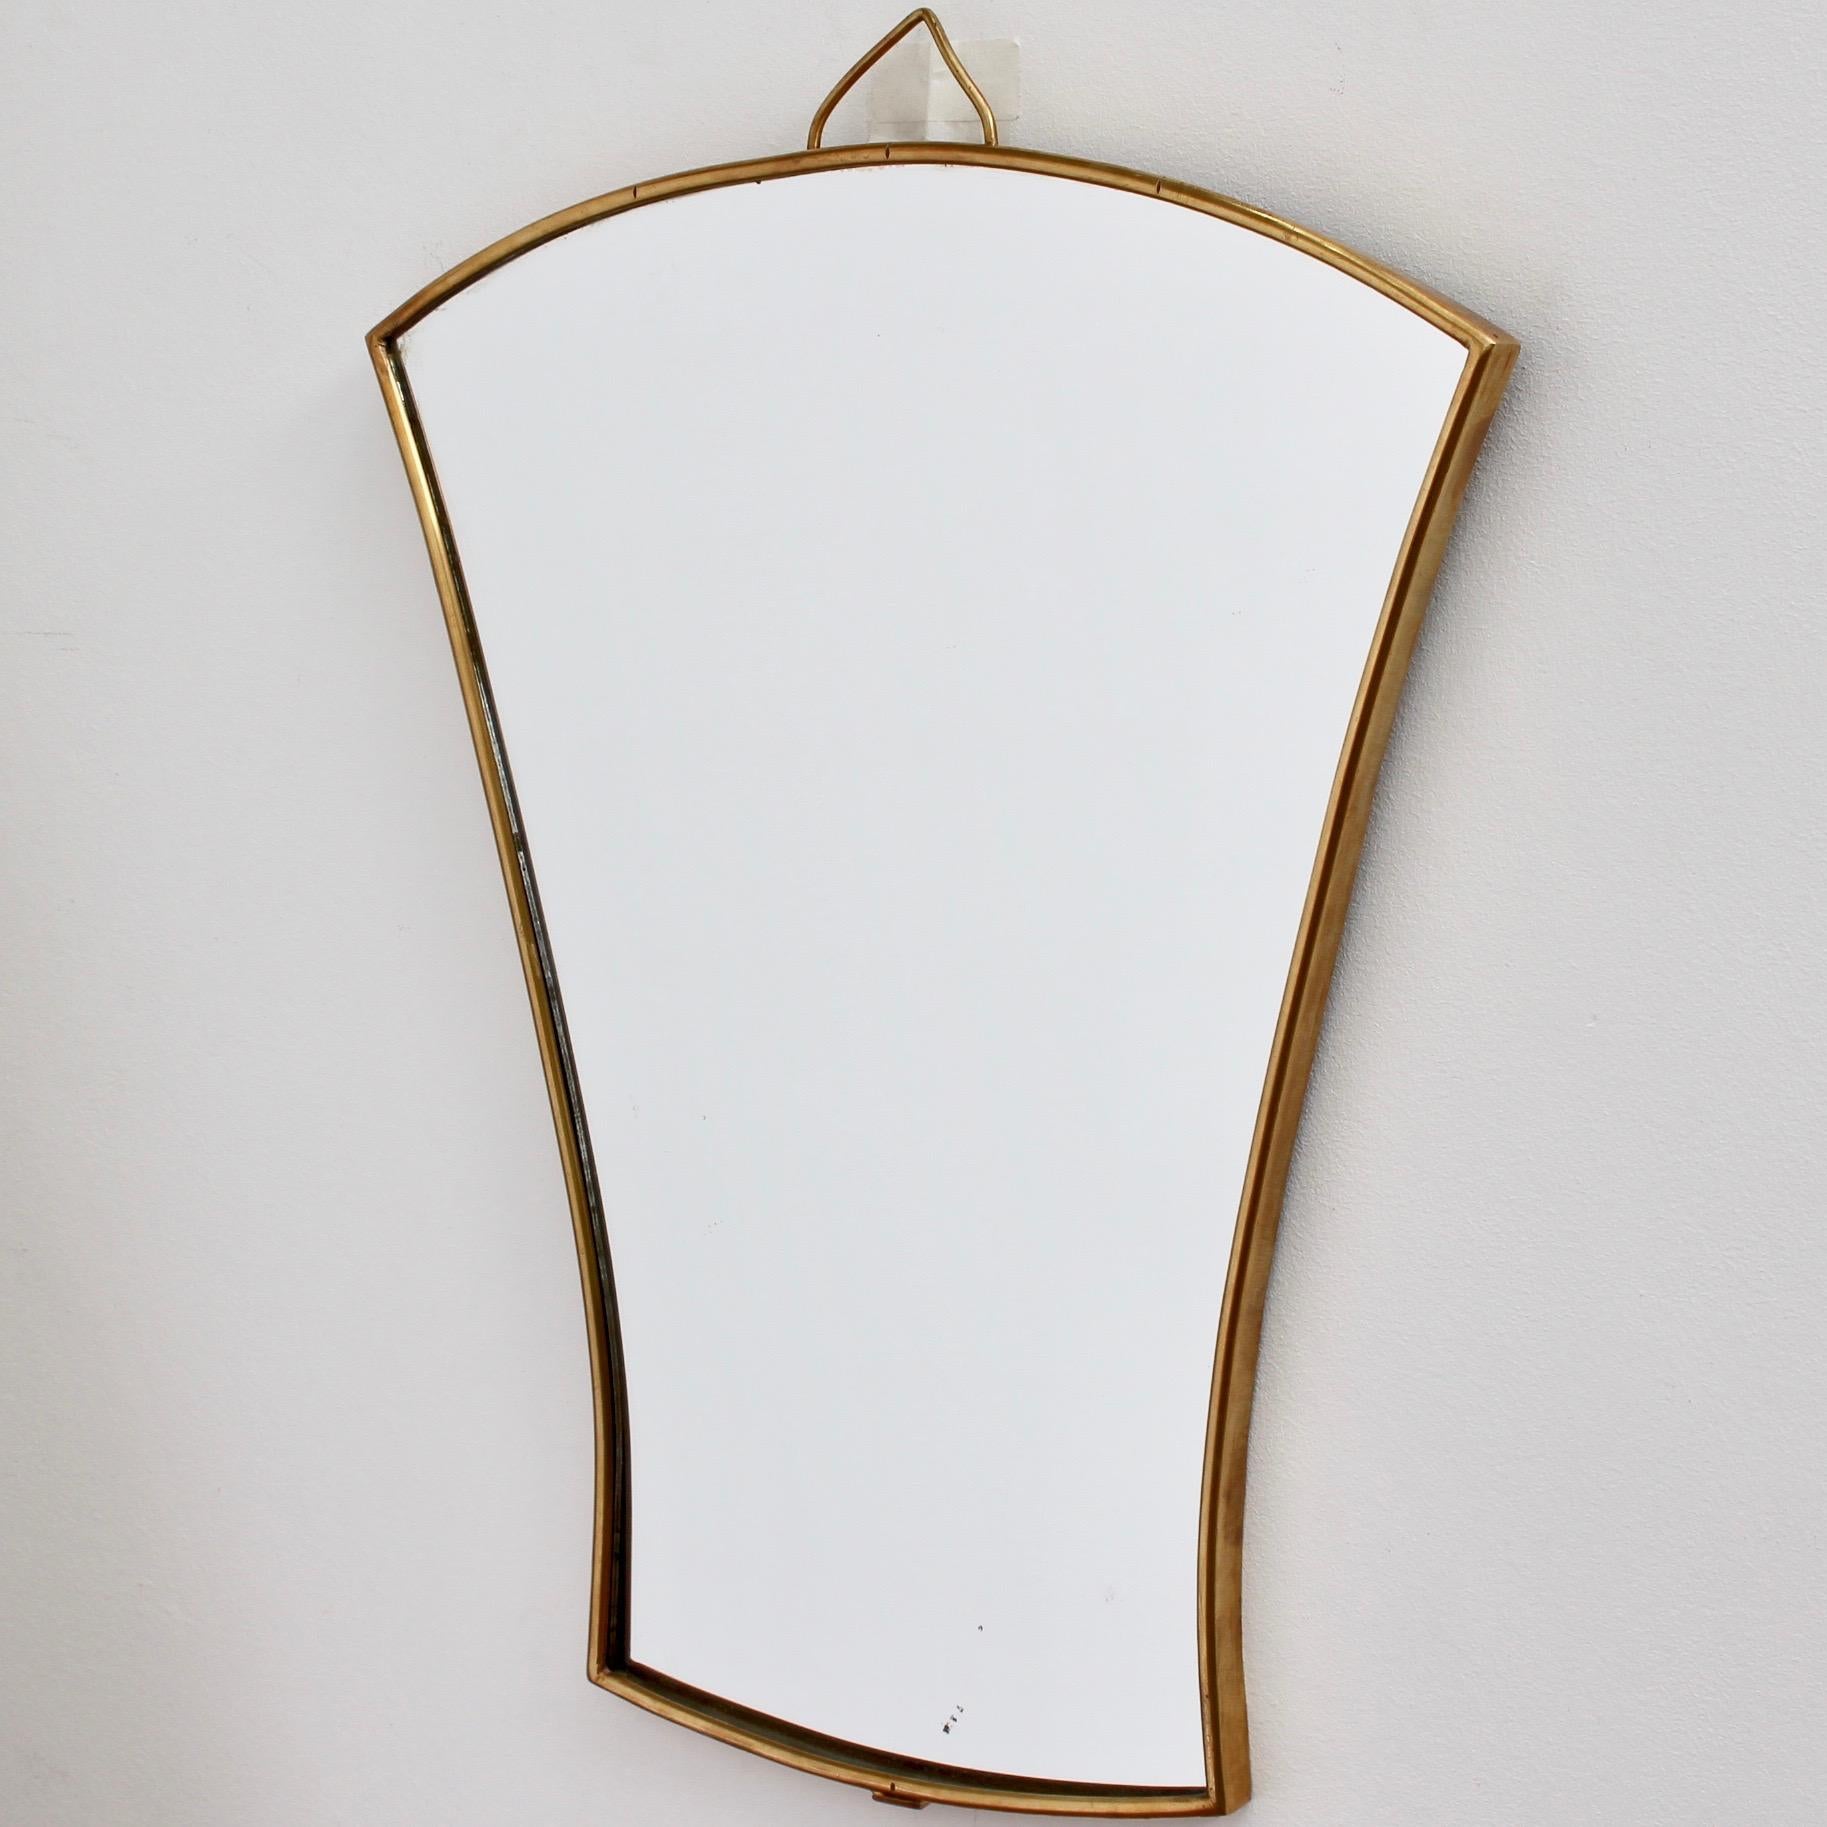 Midcentury Italian Fan-Shaped Wall Mirror with Brass Frame, circa 1950s, Small 3